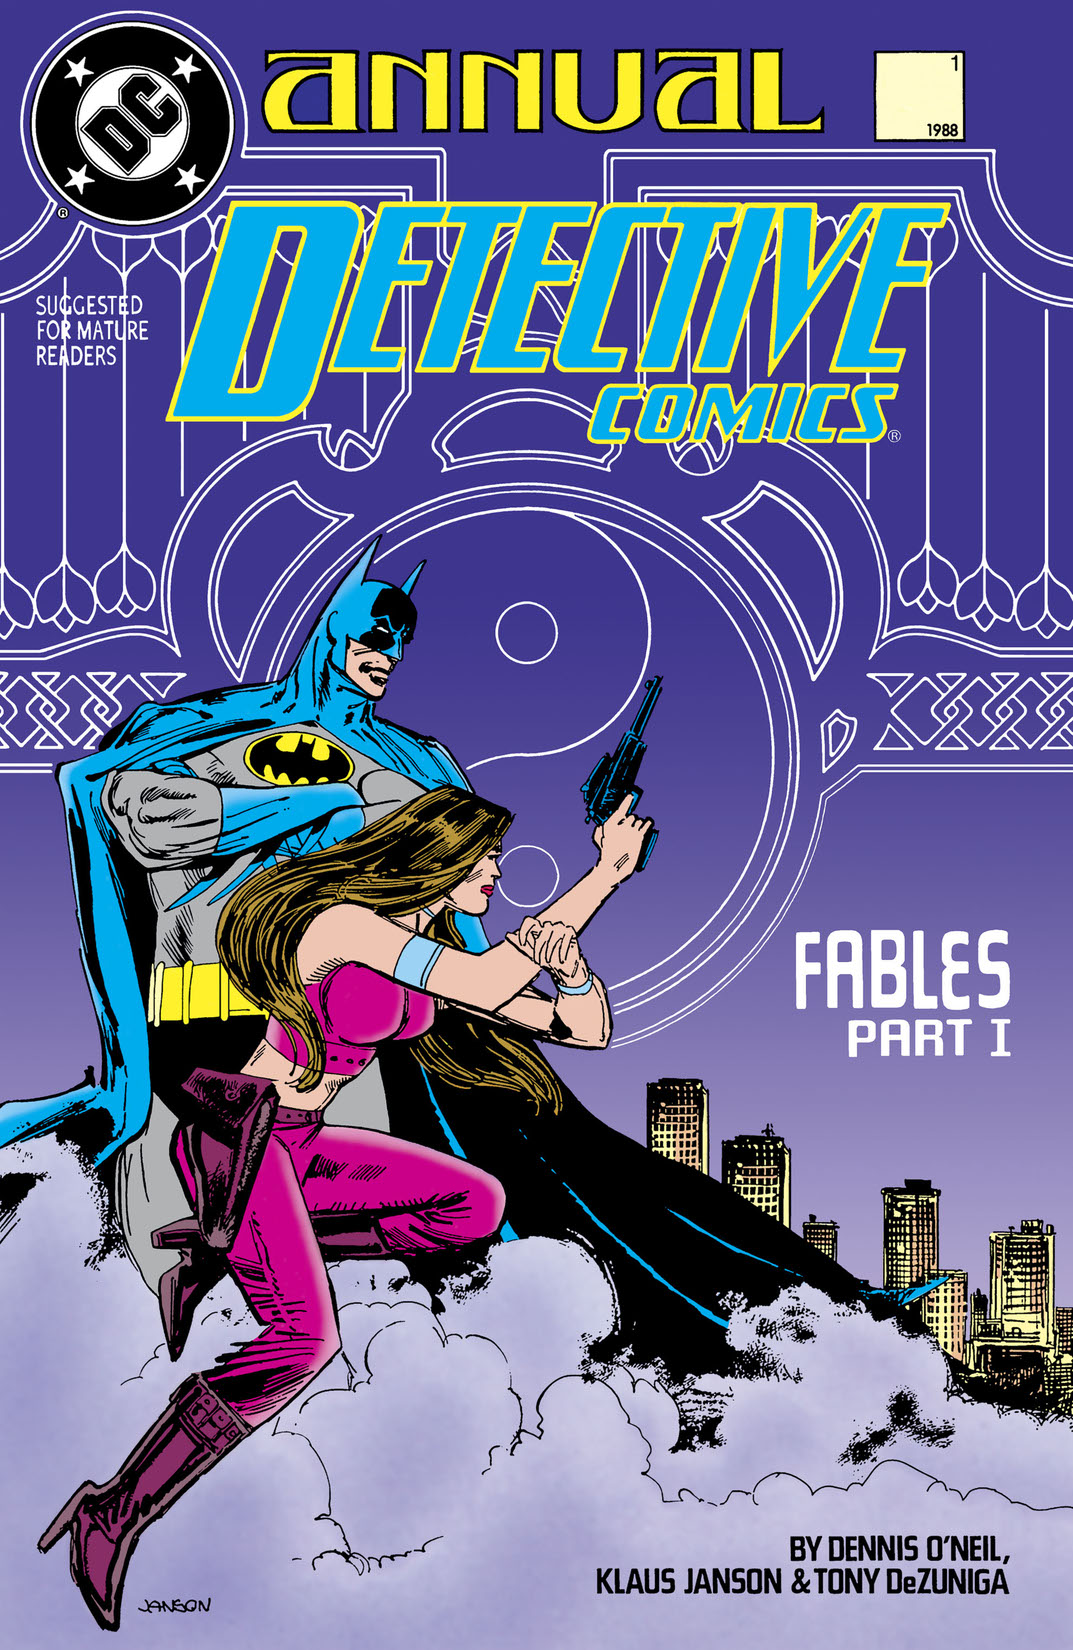 Detective Comics Annual (1988-) #1 preview images